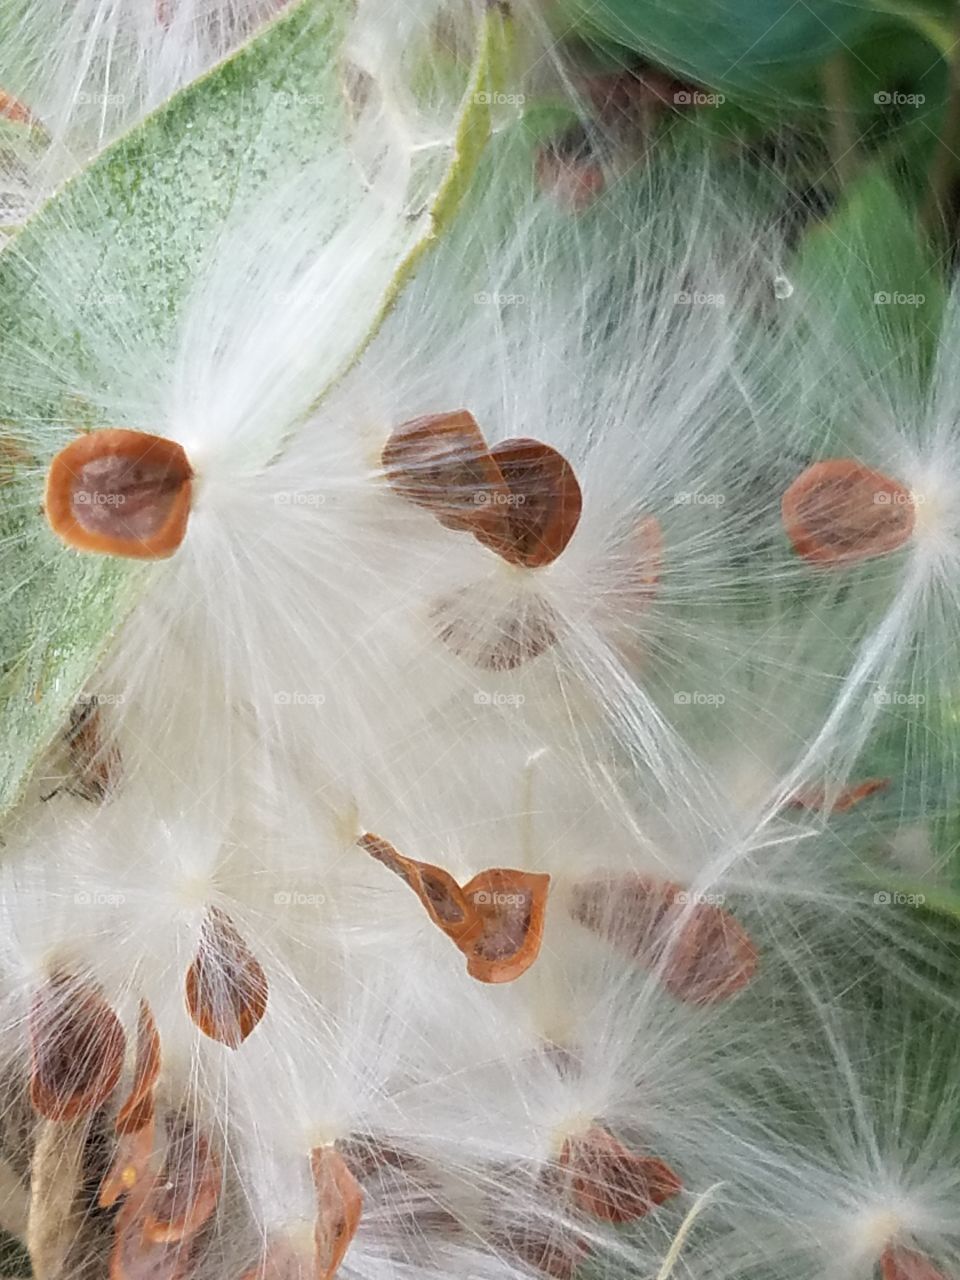 whispy seed pods